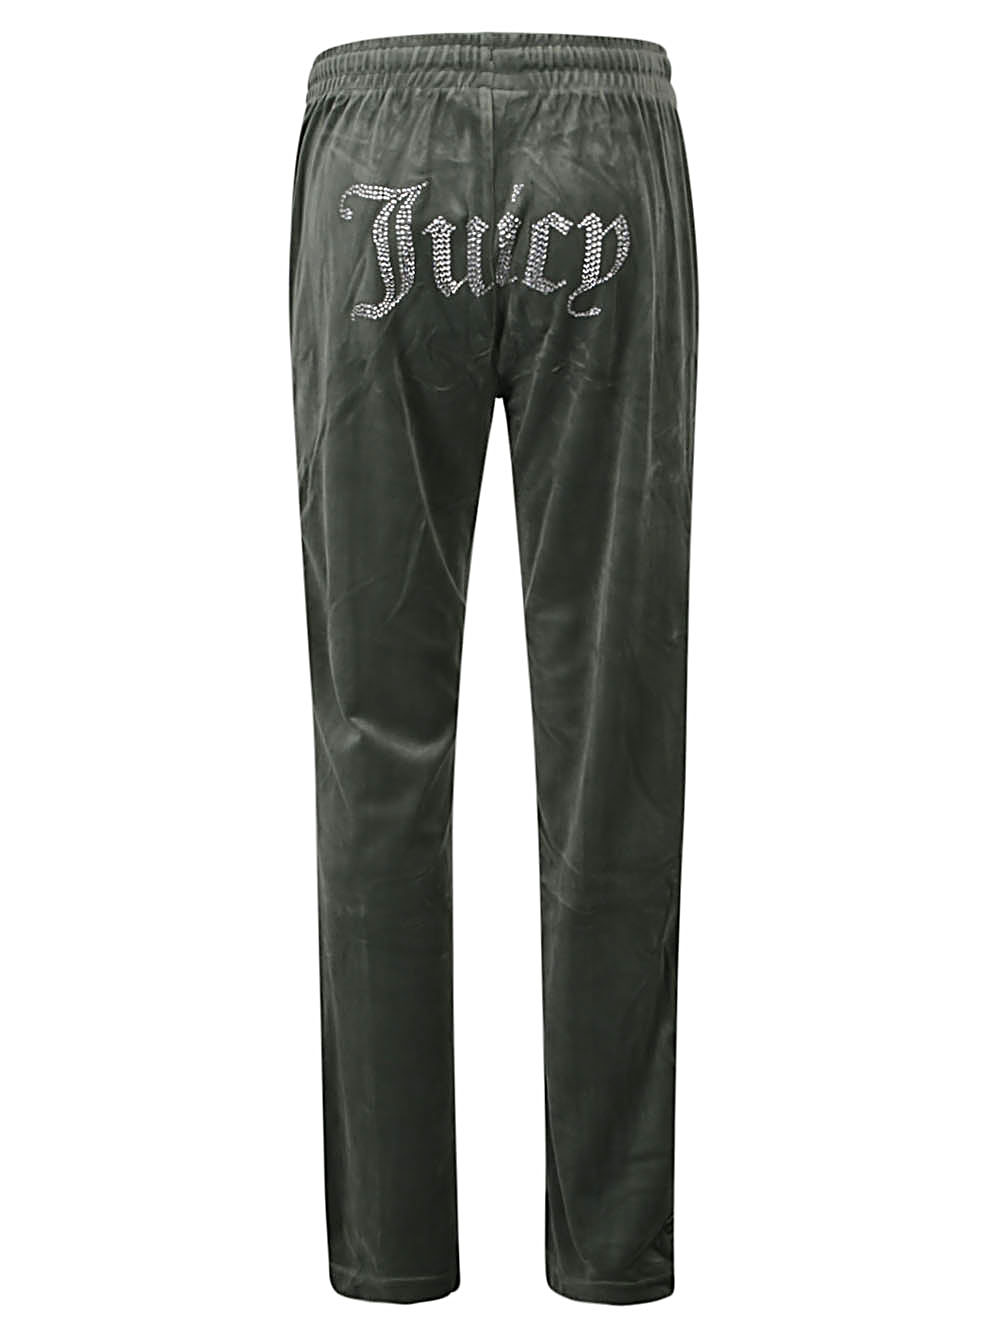 Juicy Couture JUICY COUTURE- Logo Sweatpants